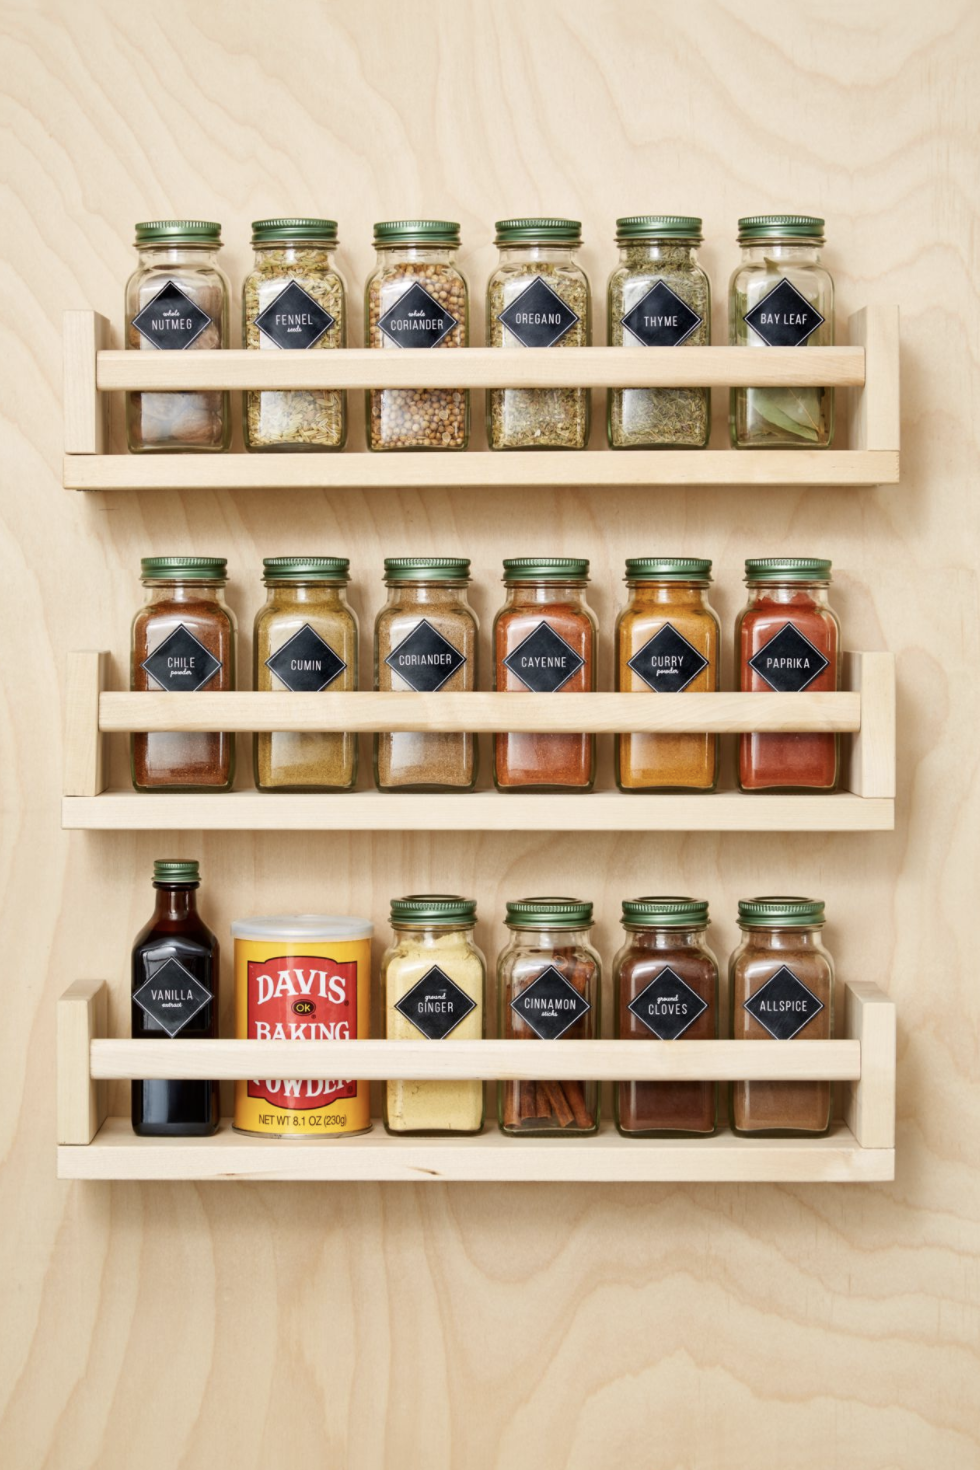 https://hips.hearstapps.com/hmg-prod/images/pantry-organization-ideas-spice-rack-1649011403.png?crop=1xw:0.9919028340080972xh;center,top&resize=980:*